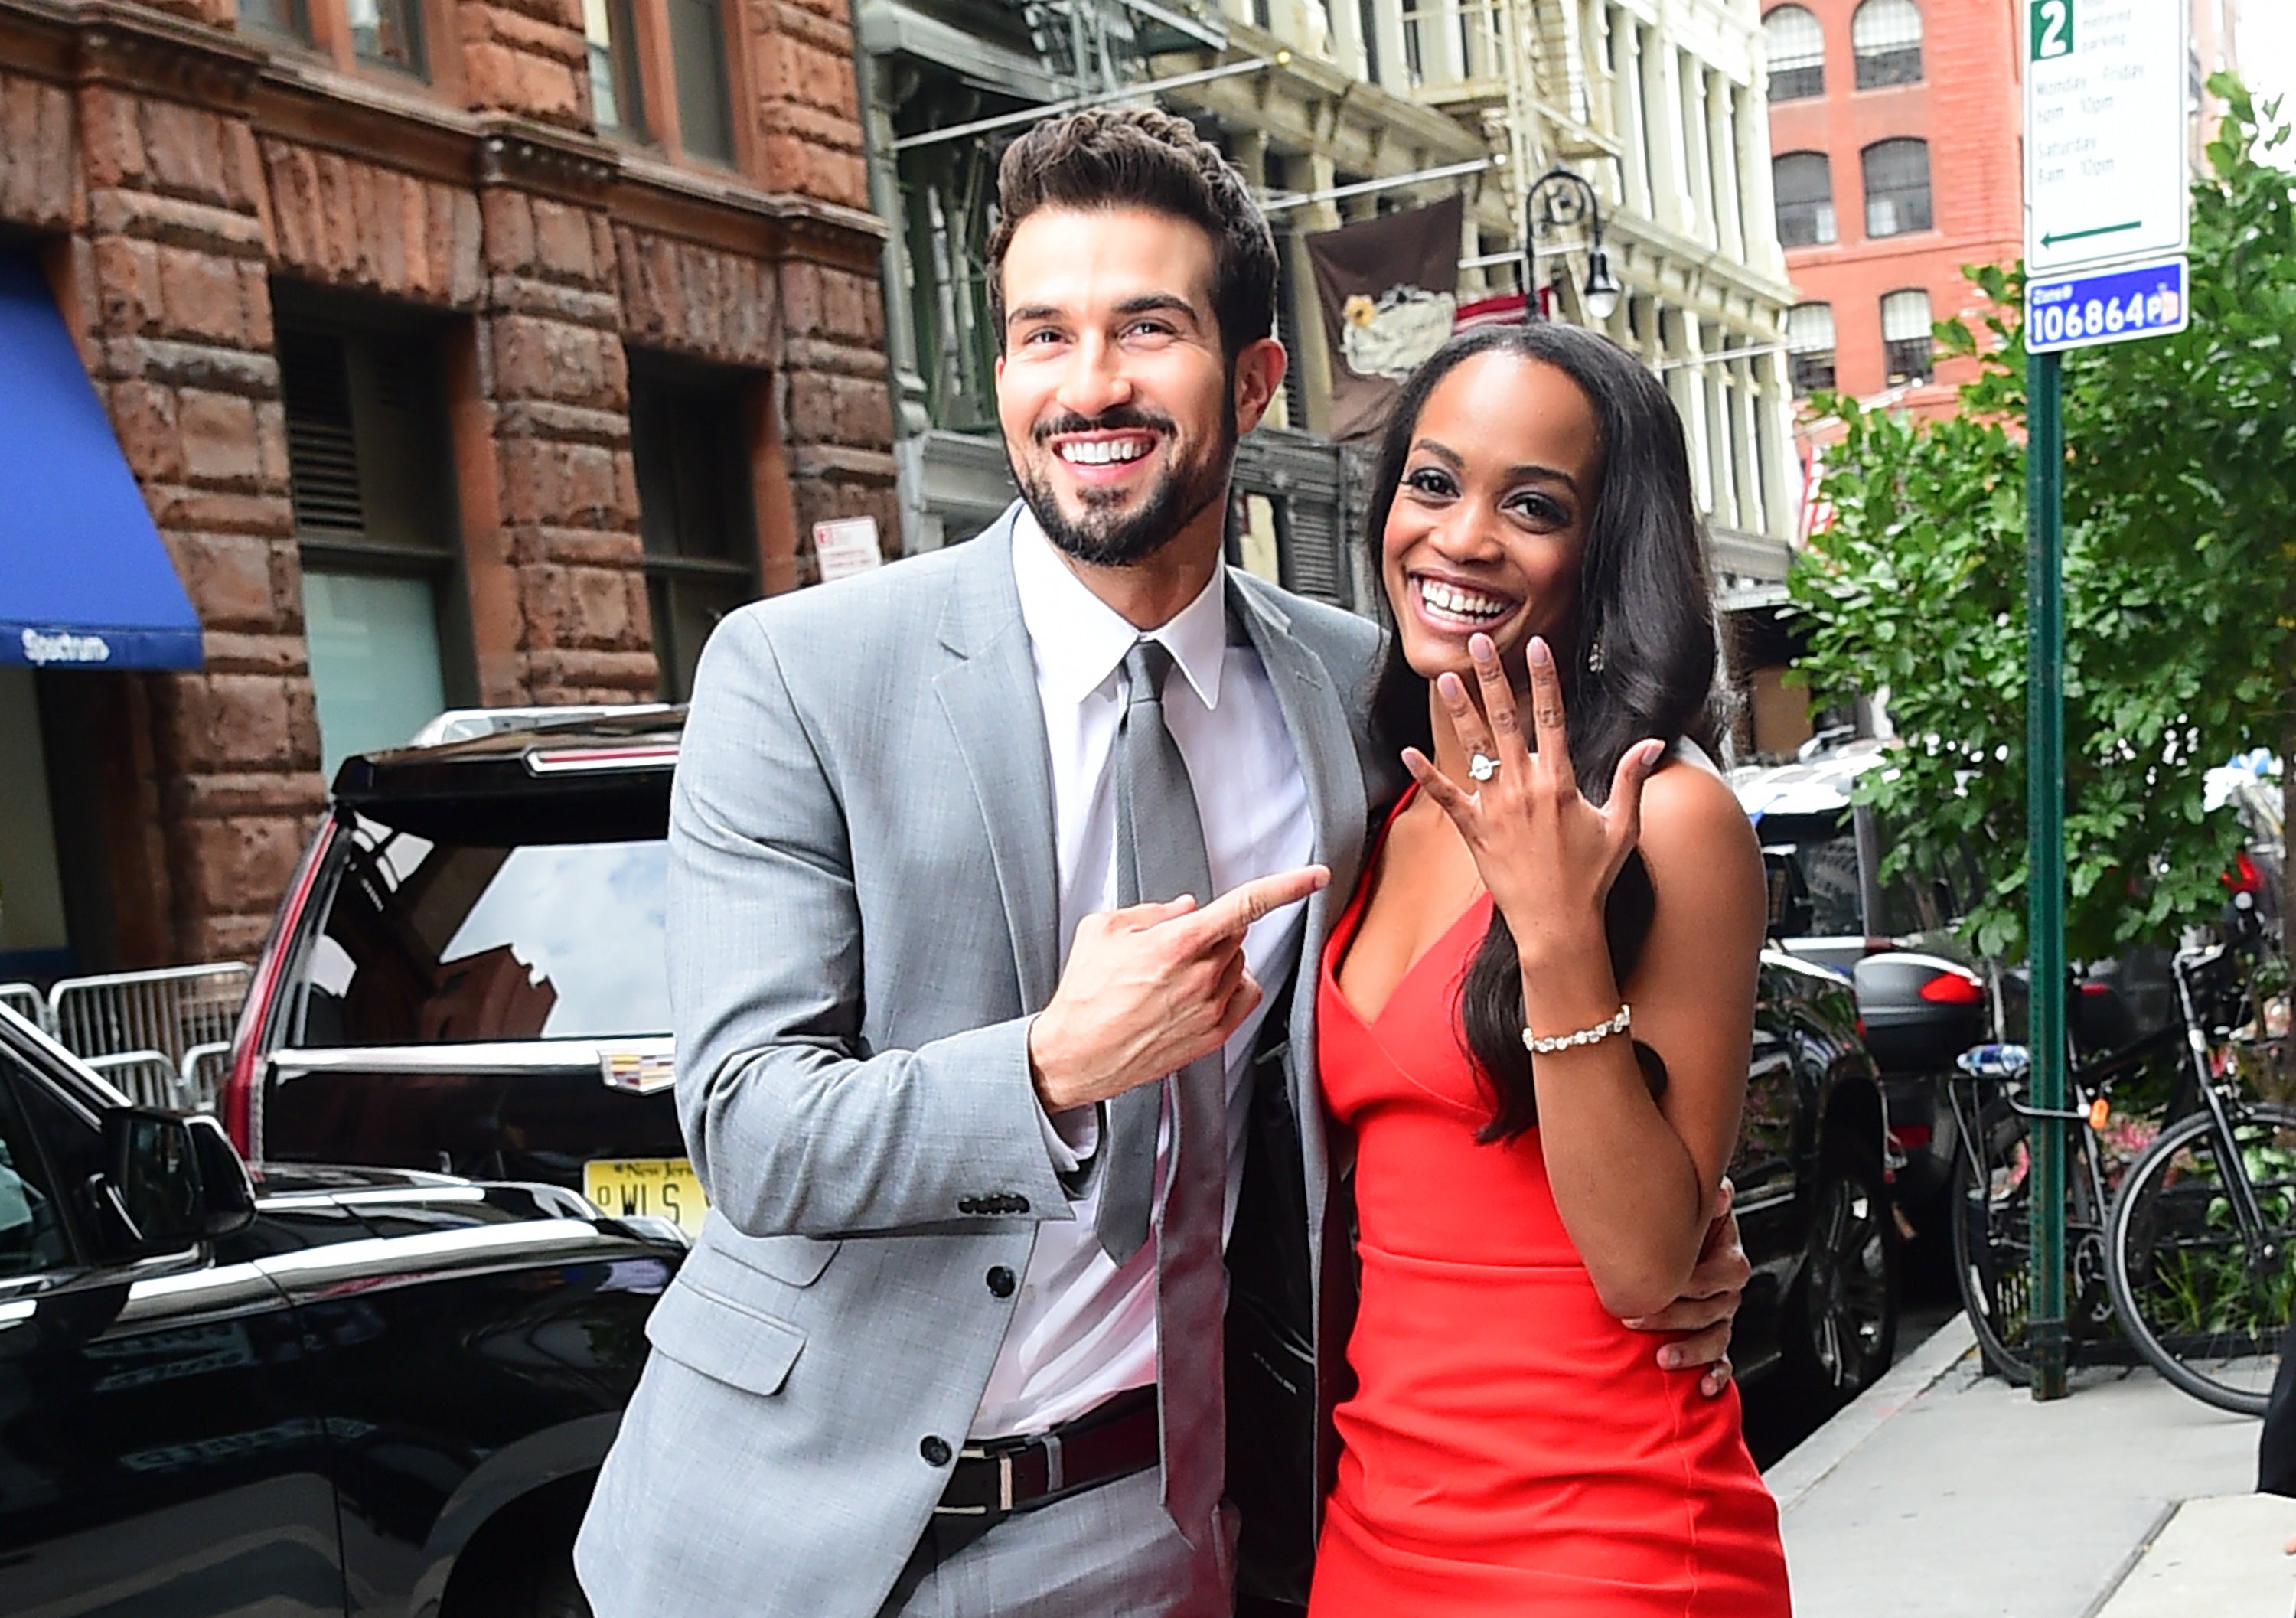 The Bachelorette's Rachel Lindsay Dishes on Wedding (& Baby!) Plans with Bryan Abasolo: 'I'm Ready!'